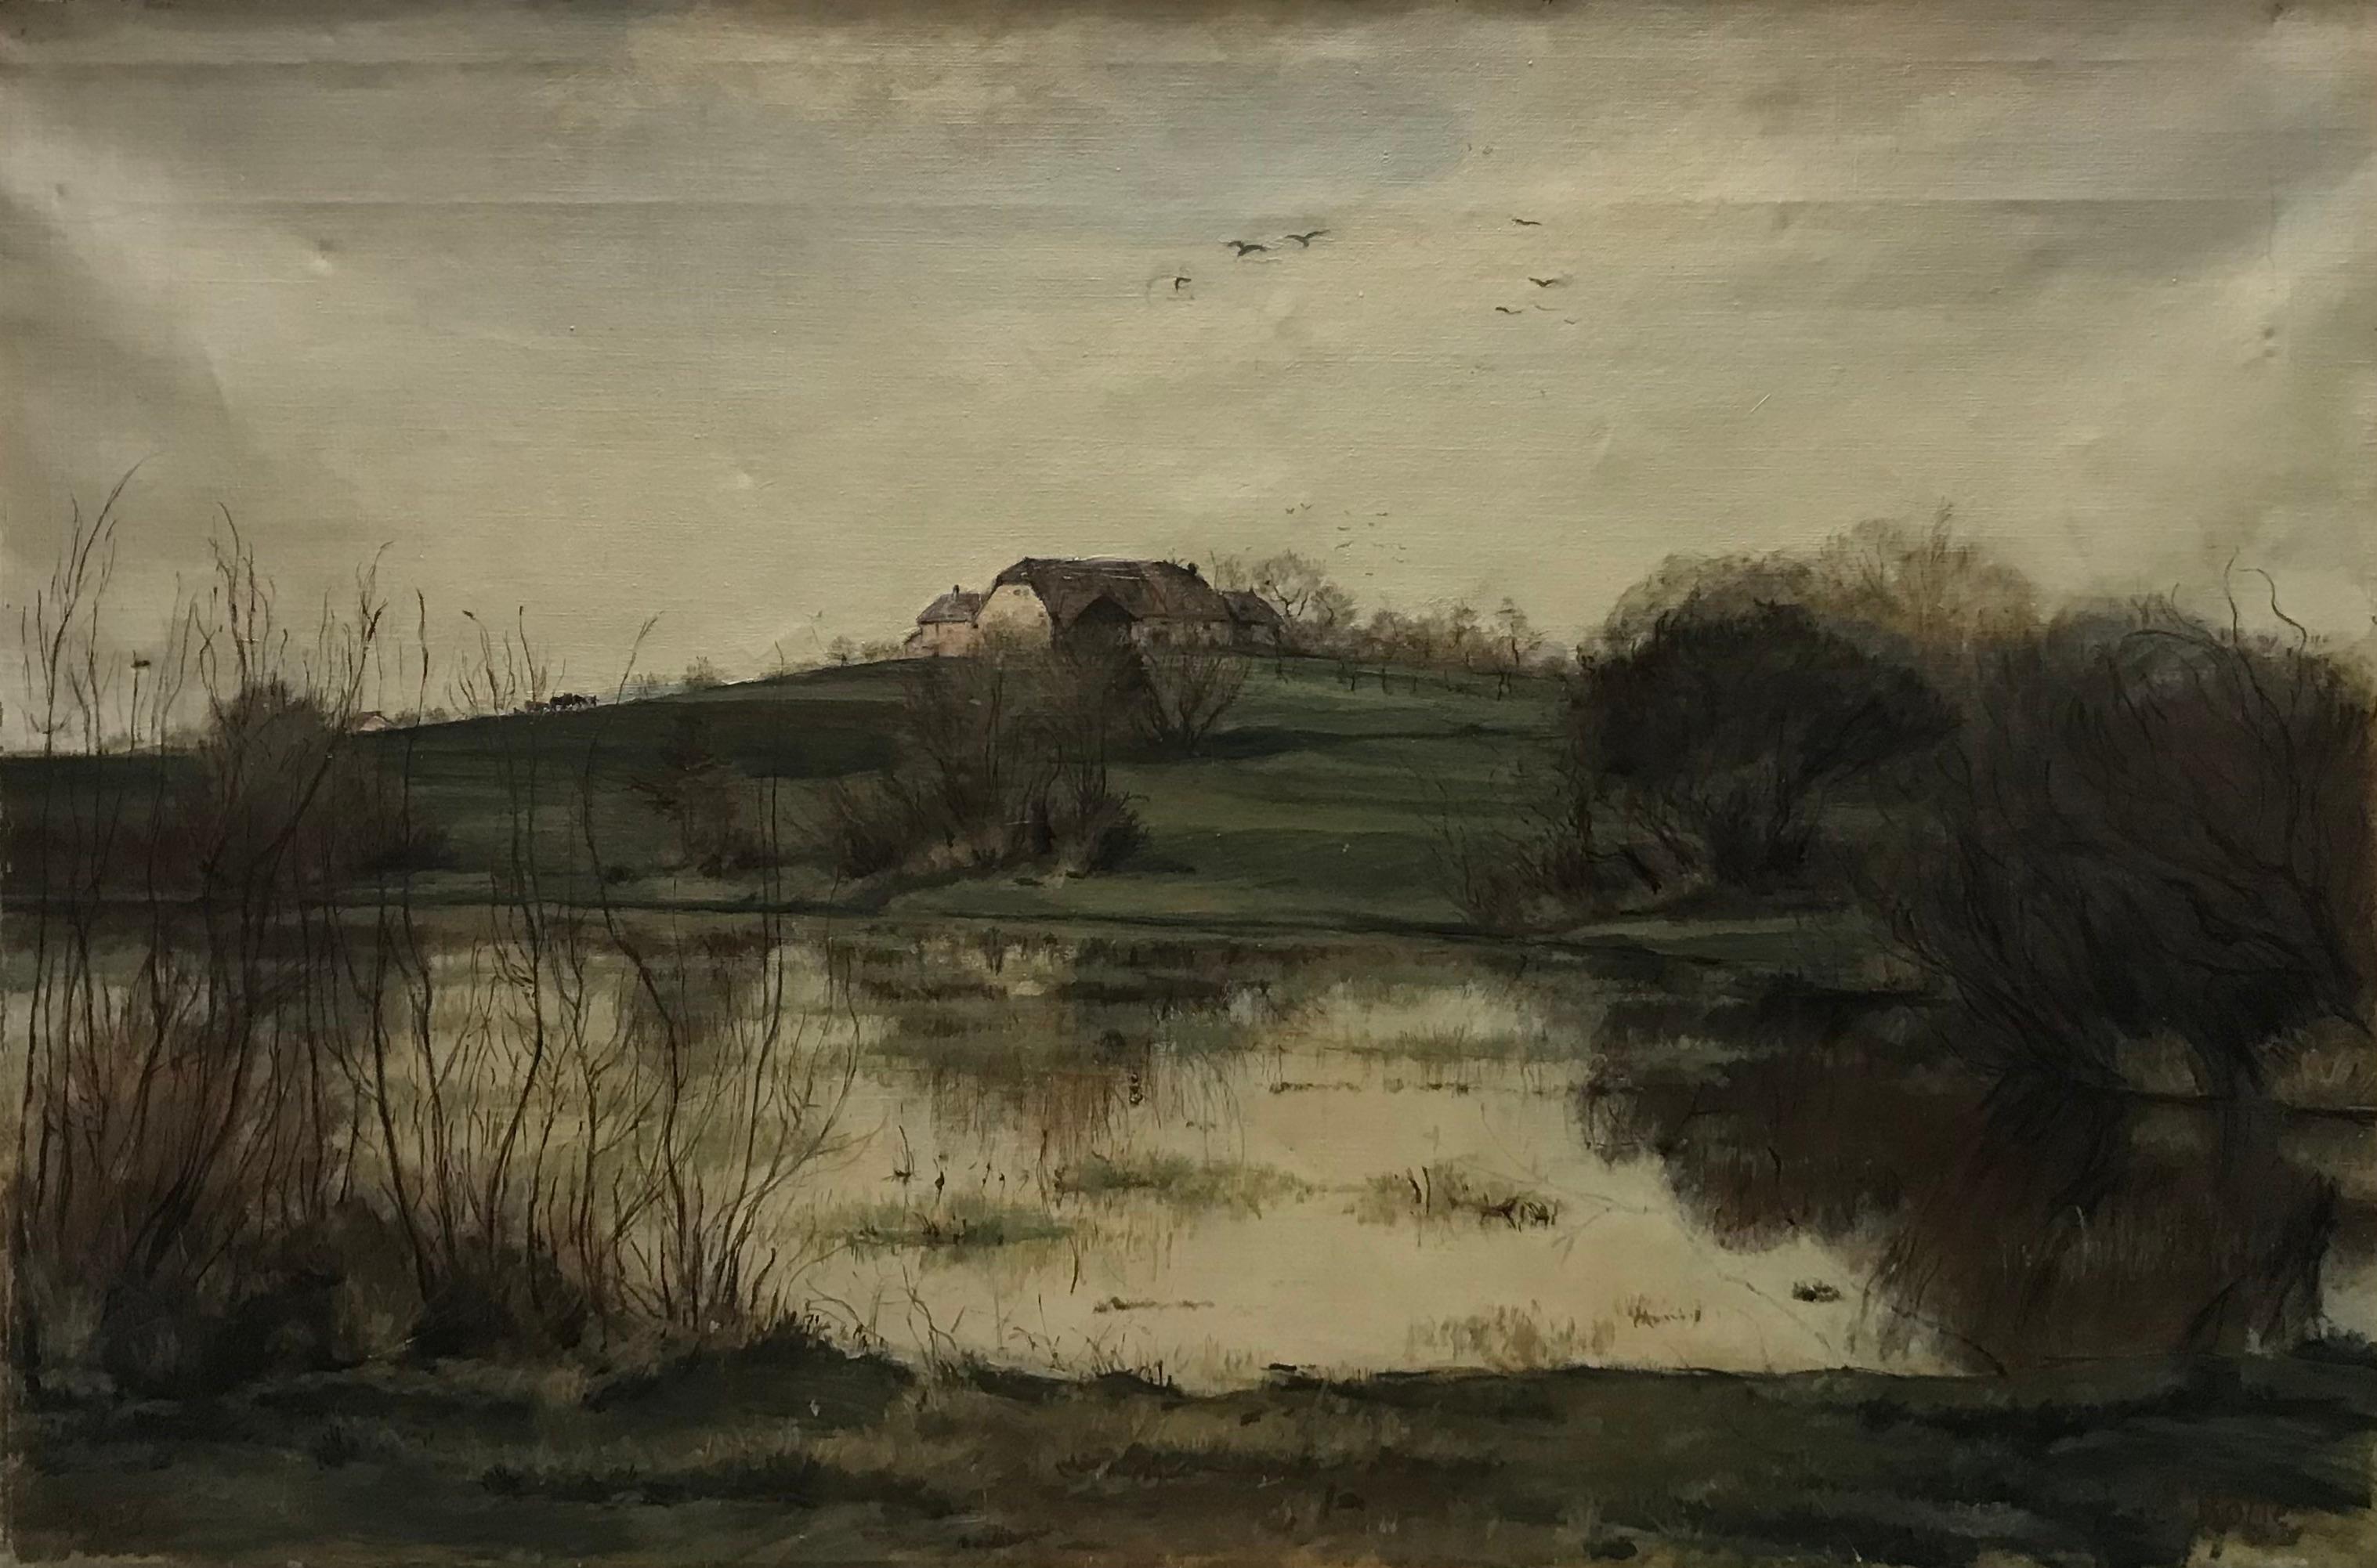 César Alphonse Bolle Landscape Painting - "At the edge of the pond" by Cesar Bolle - oil on canvas 70x105 cm